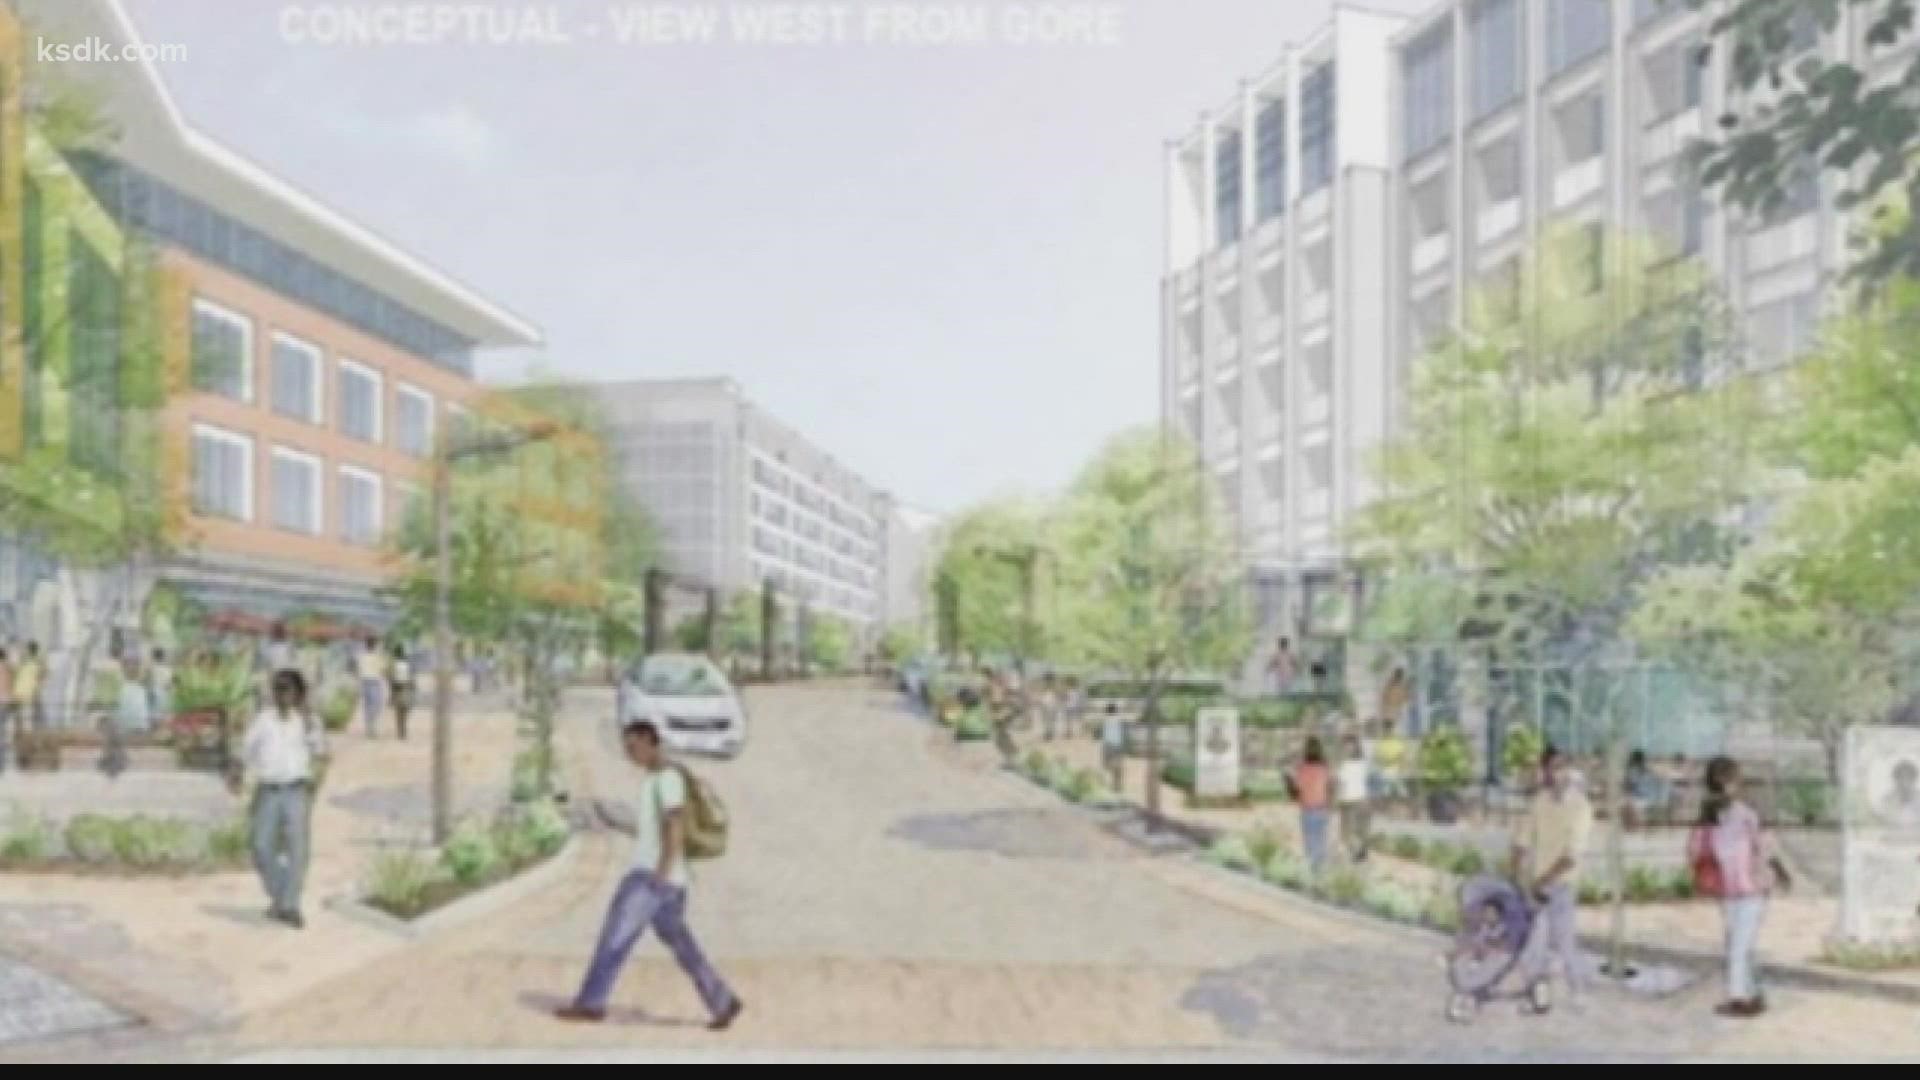 Mayor Gerry Welch said the council decided in favor of the people to end the $350M Douglass Hill Redevelopment project.